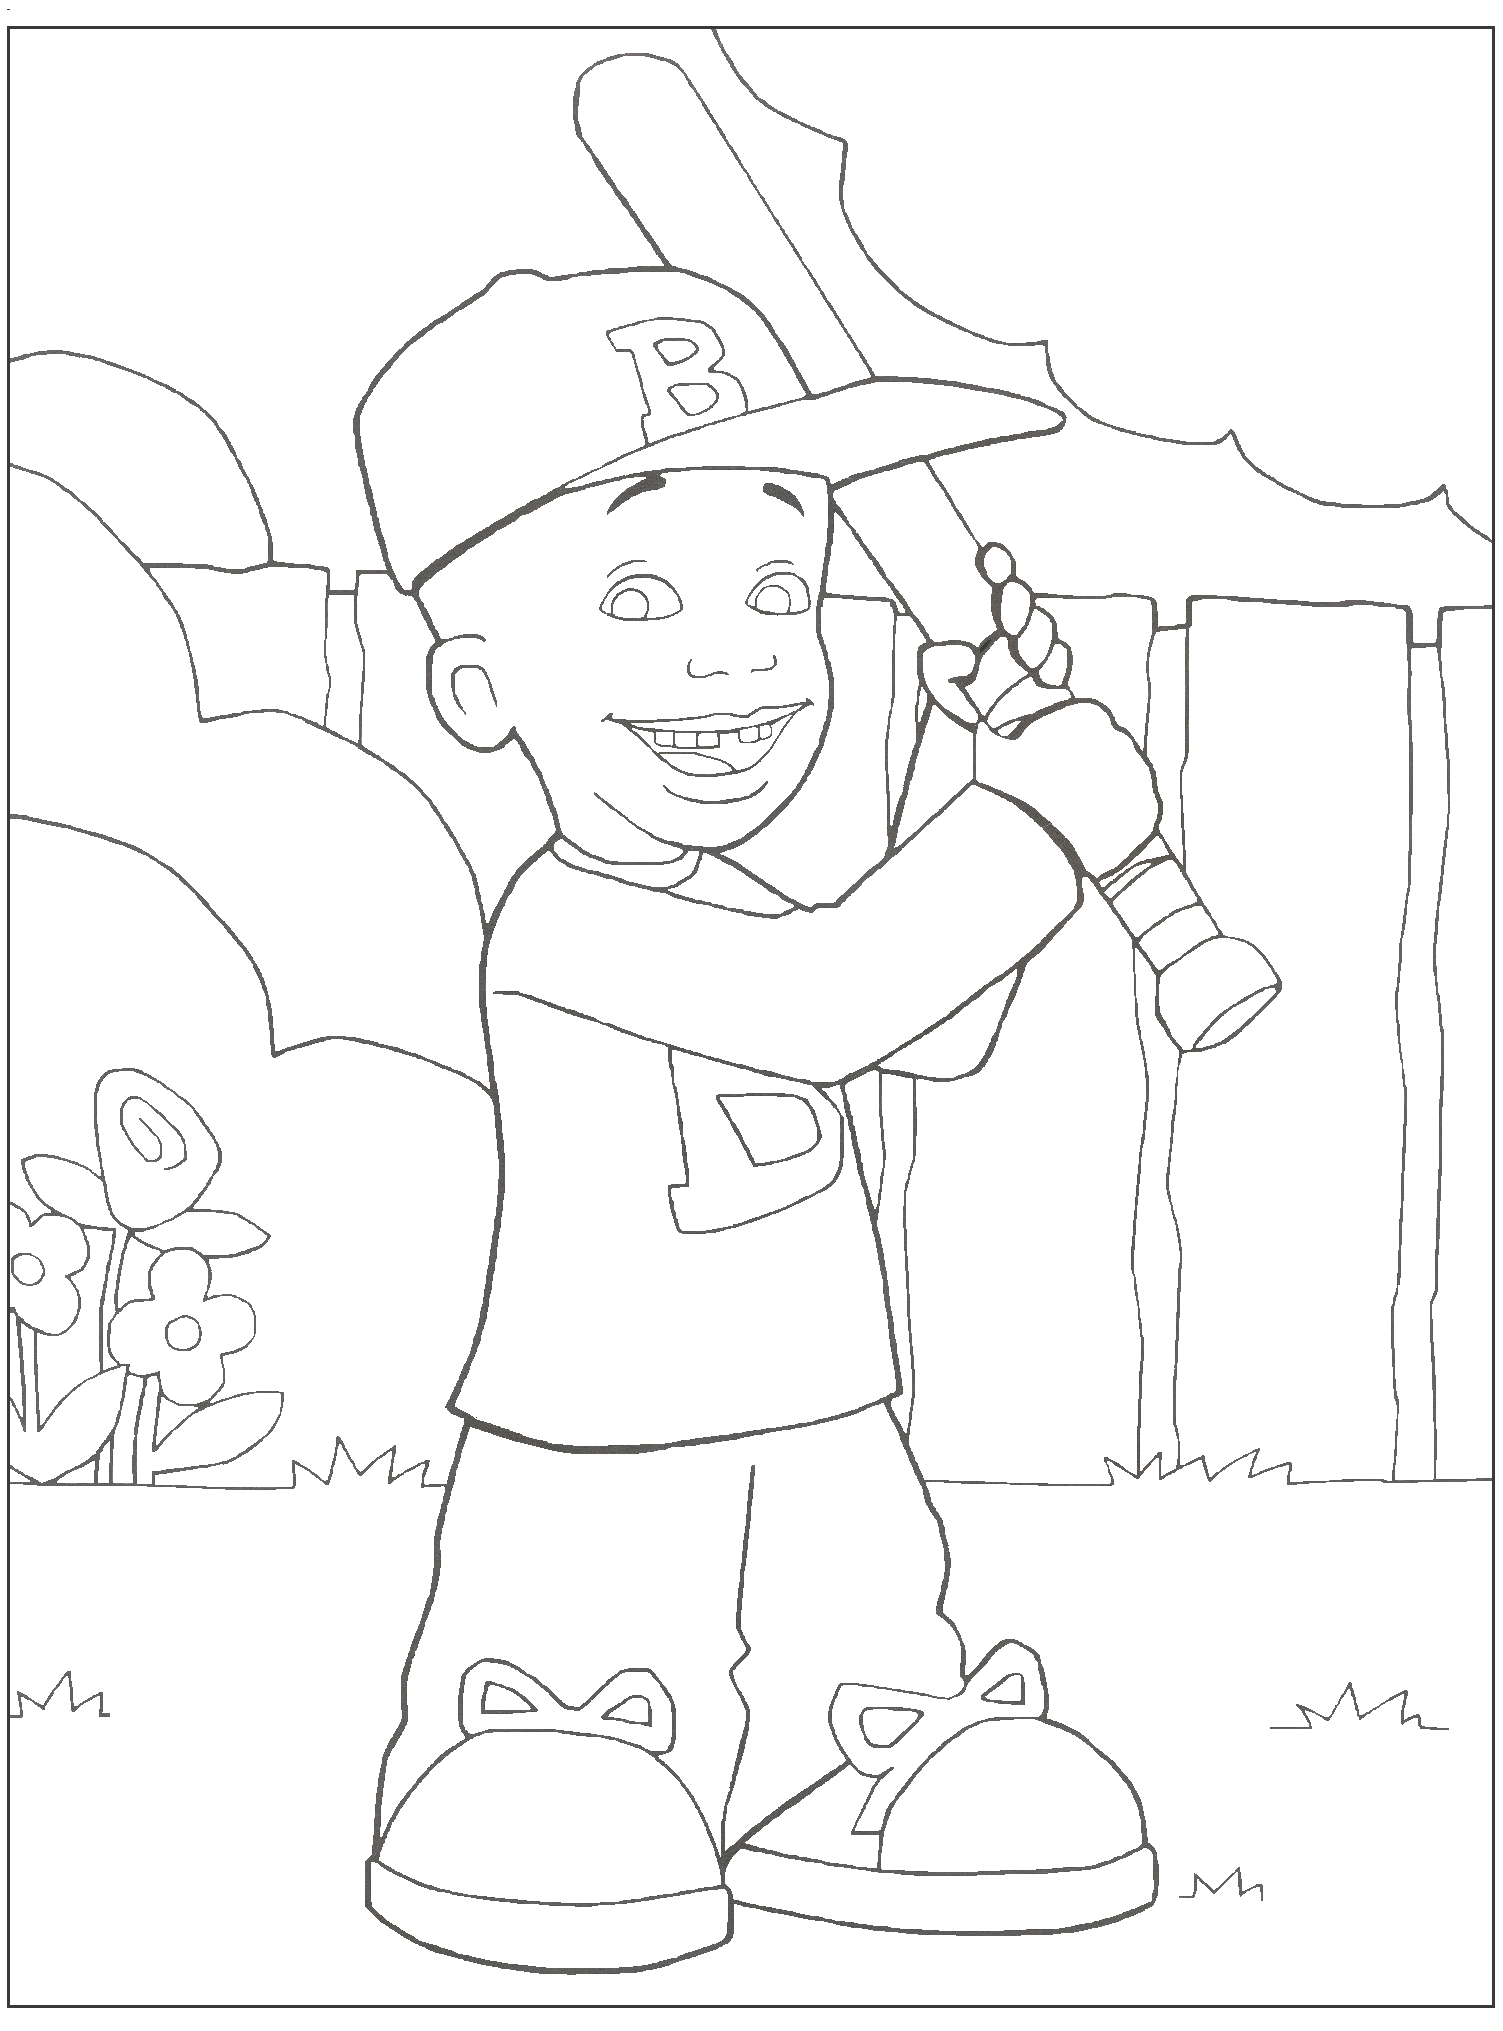 If You Give A Pig A Pancake Coloring Page - Coloring Home